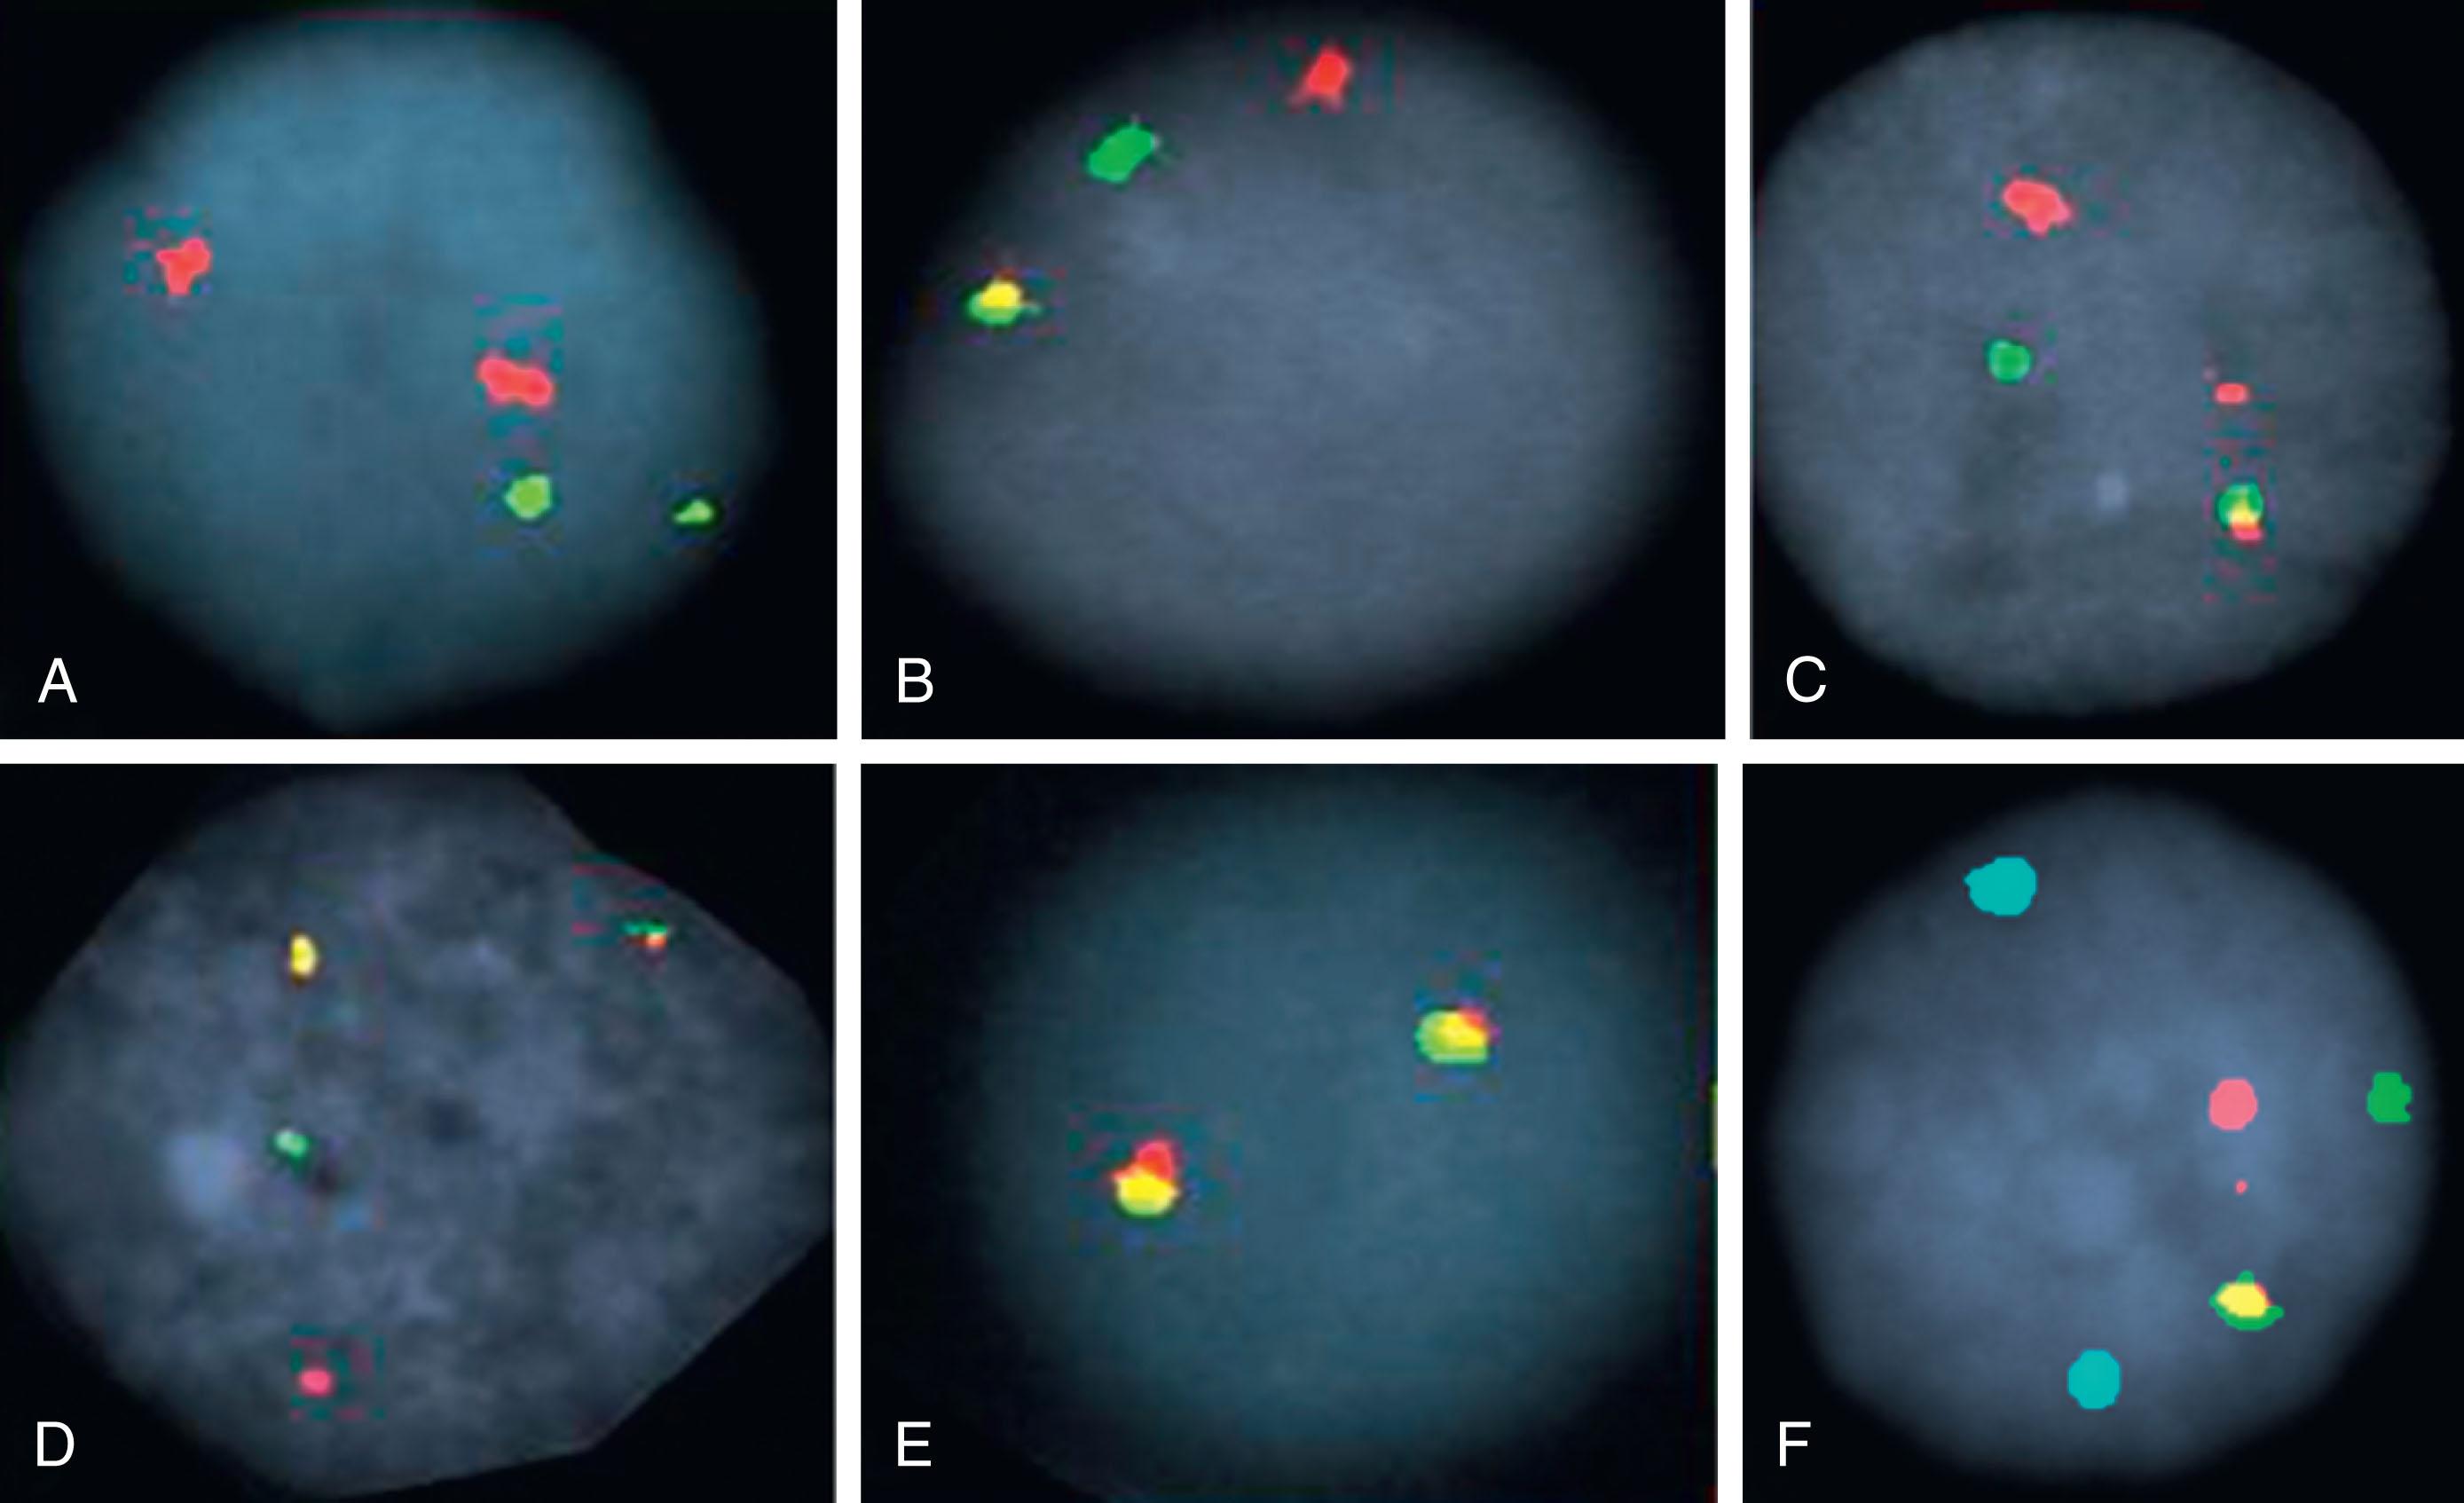 Figure 57.4, FOUR DIFFERENT PROBE STRATEGIES FOR DETECTION OF CHROMOSOMAL TRANSLOCATIONS (SEE TEXT FOR DETAILS).